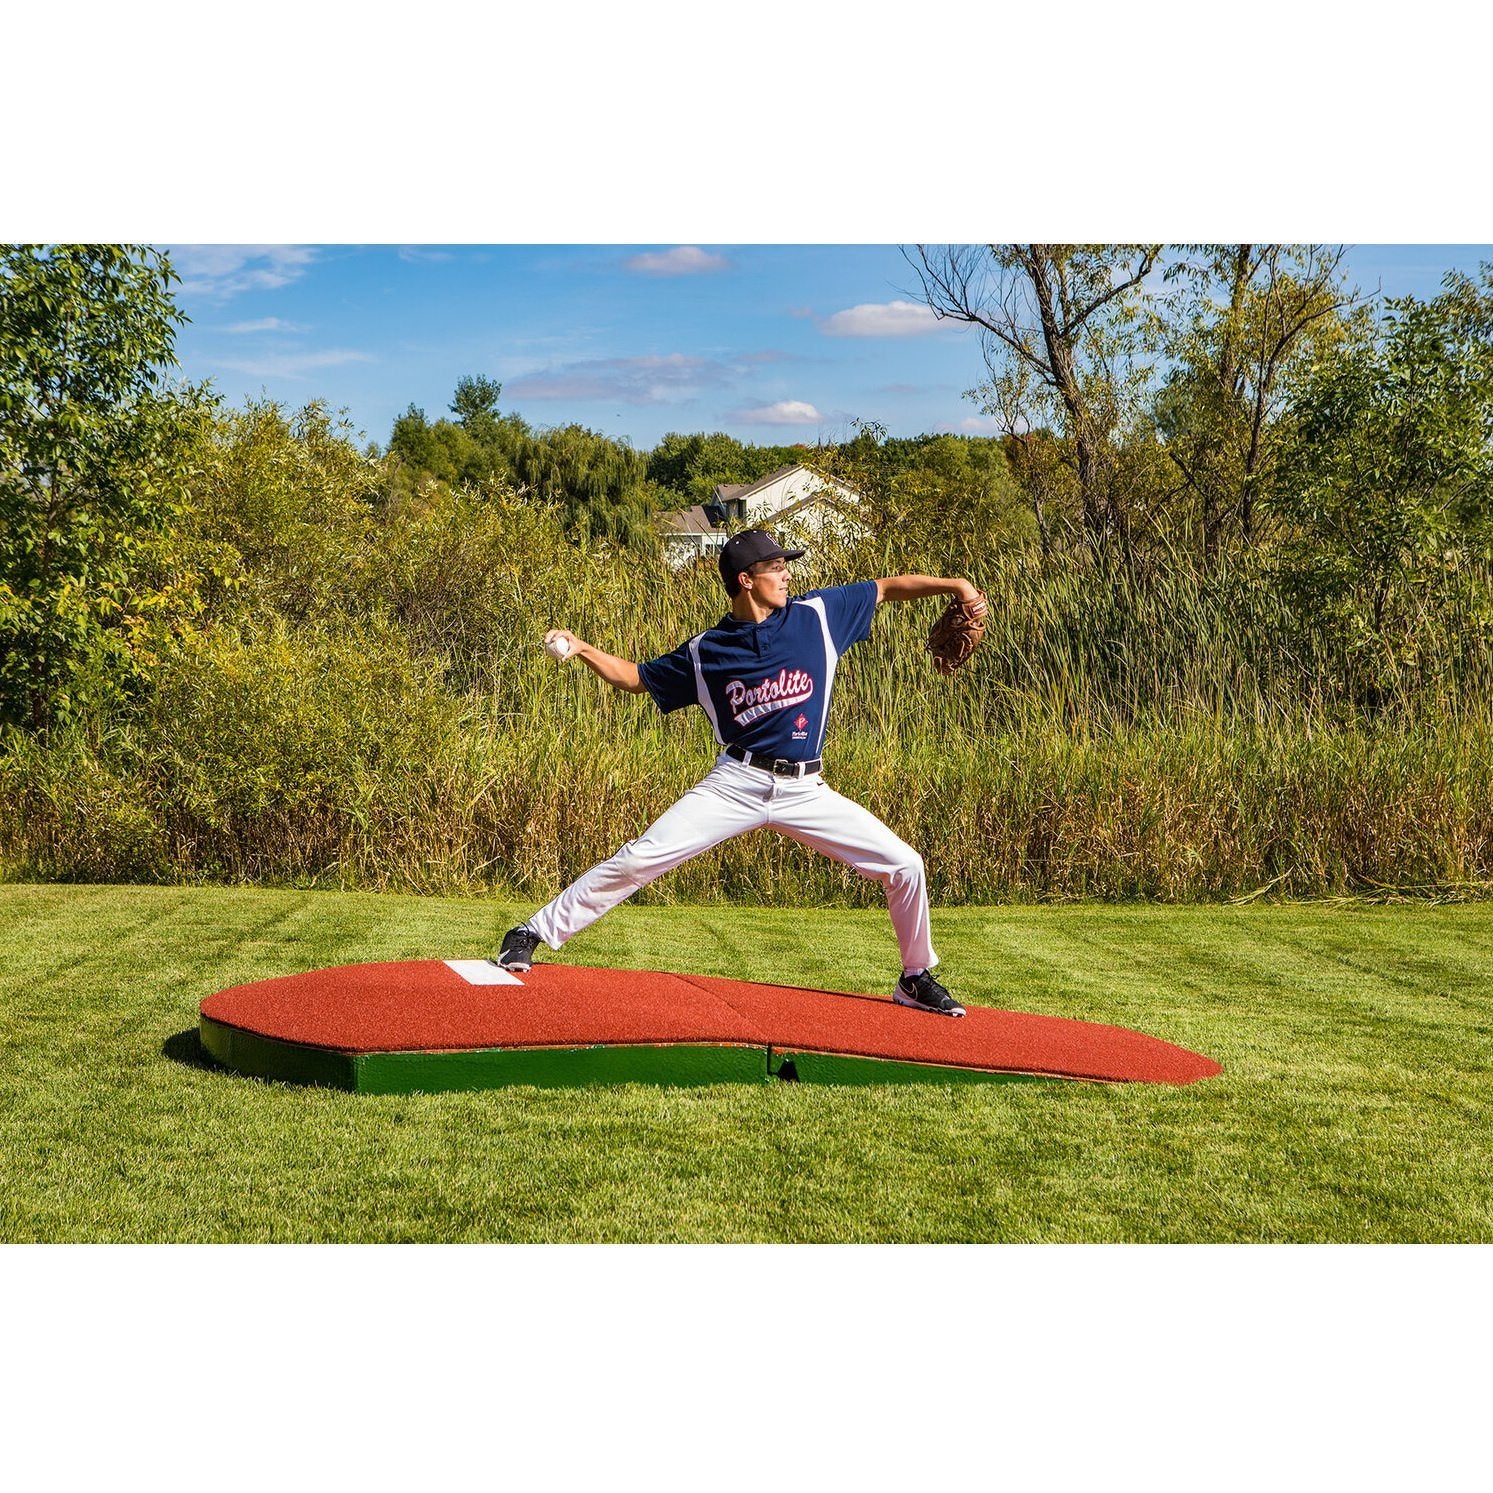 Portolite 10" Two-Piece Portable Pitching Mound red side view pitcher on mound